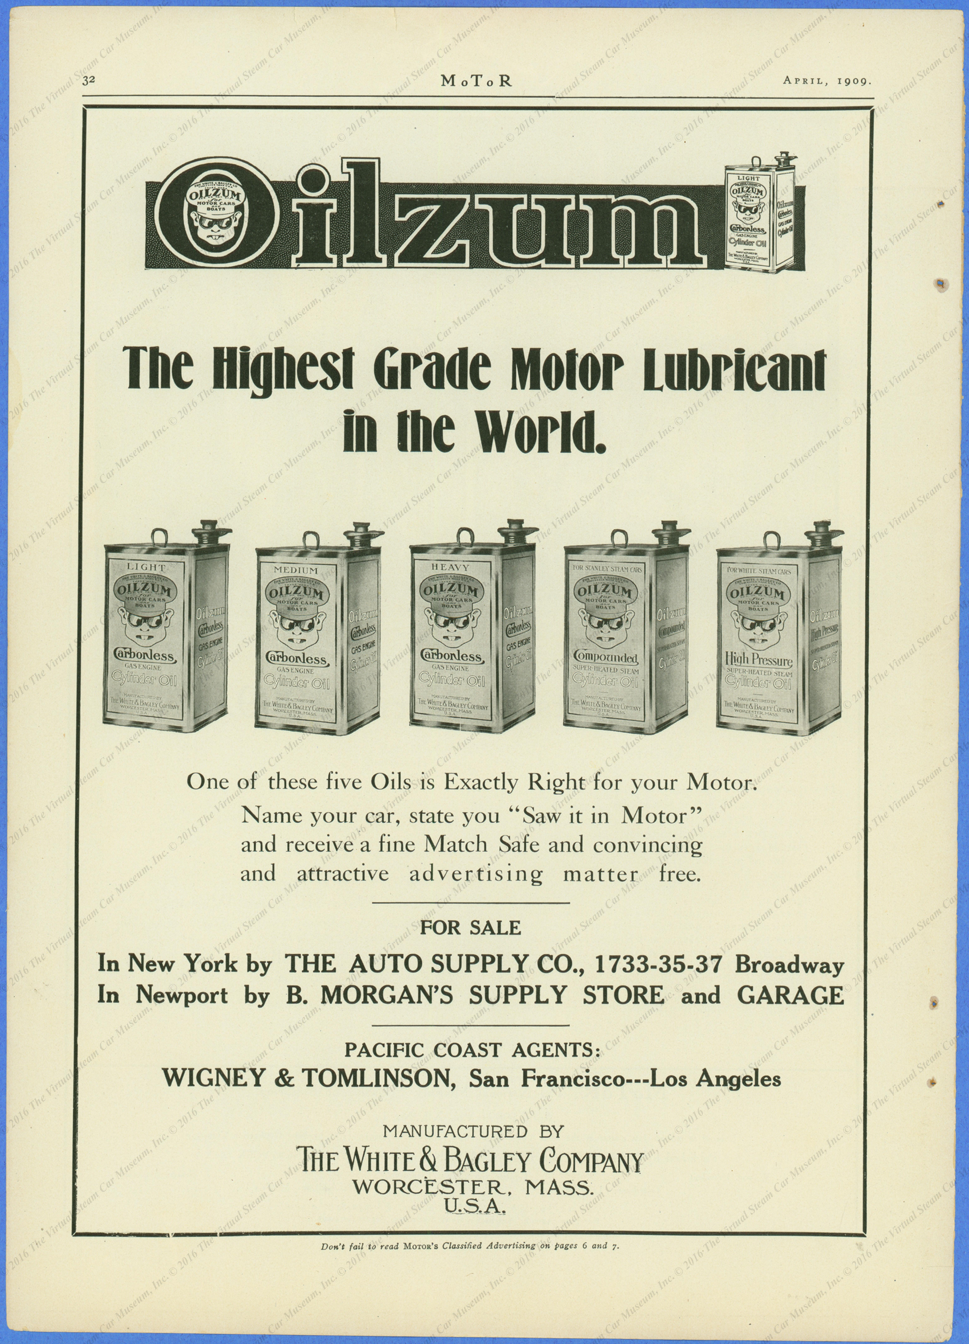 This Oilzum advertisement appeared in Motor Magazine for April 1909.  Page 32.